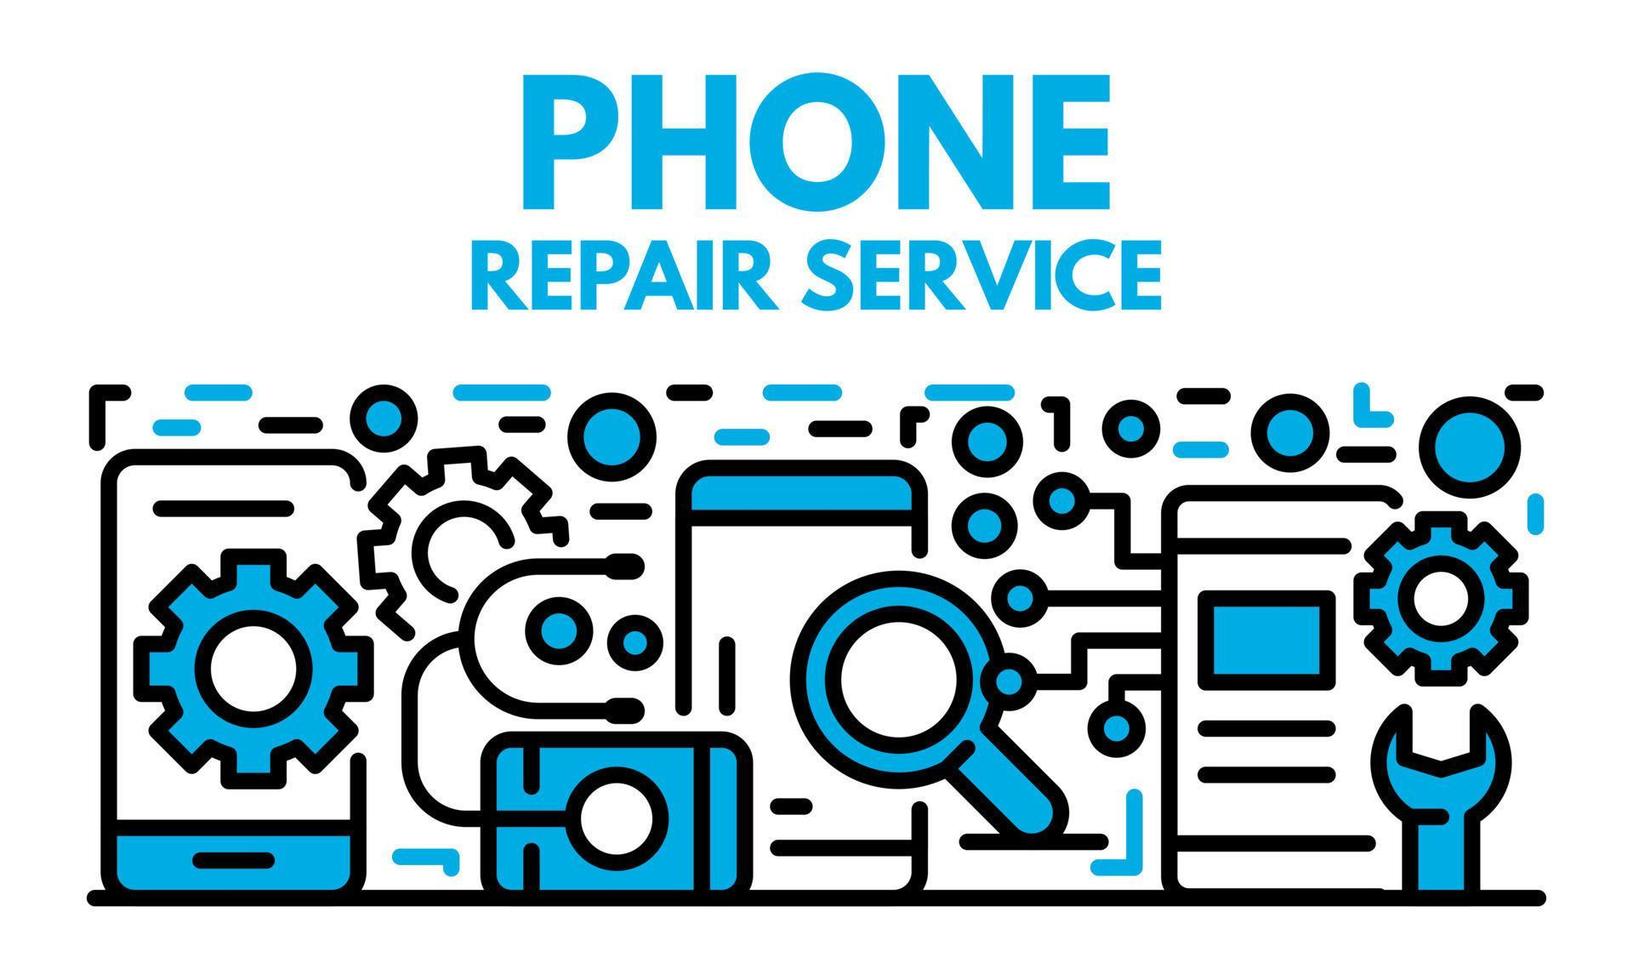 Phone repair service banner, outline style vector